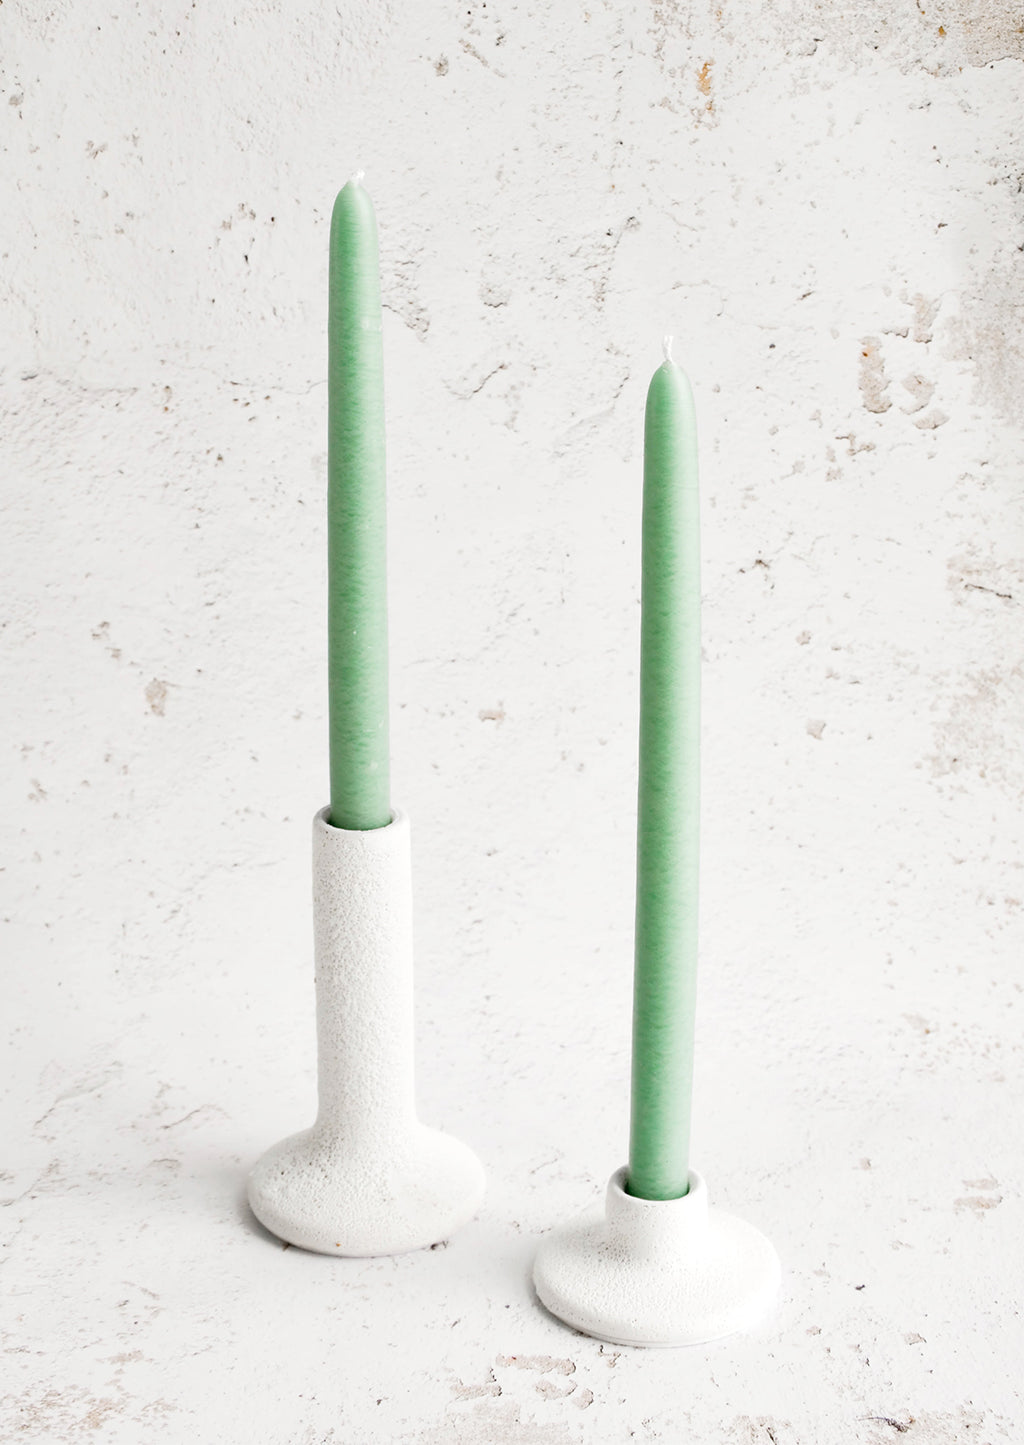 2: White ceramic taper candle holders in short and tall heights, displaying seafoam green taper candles